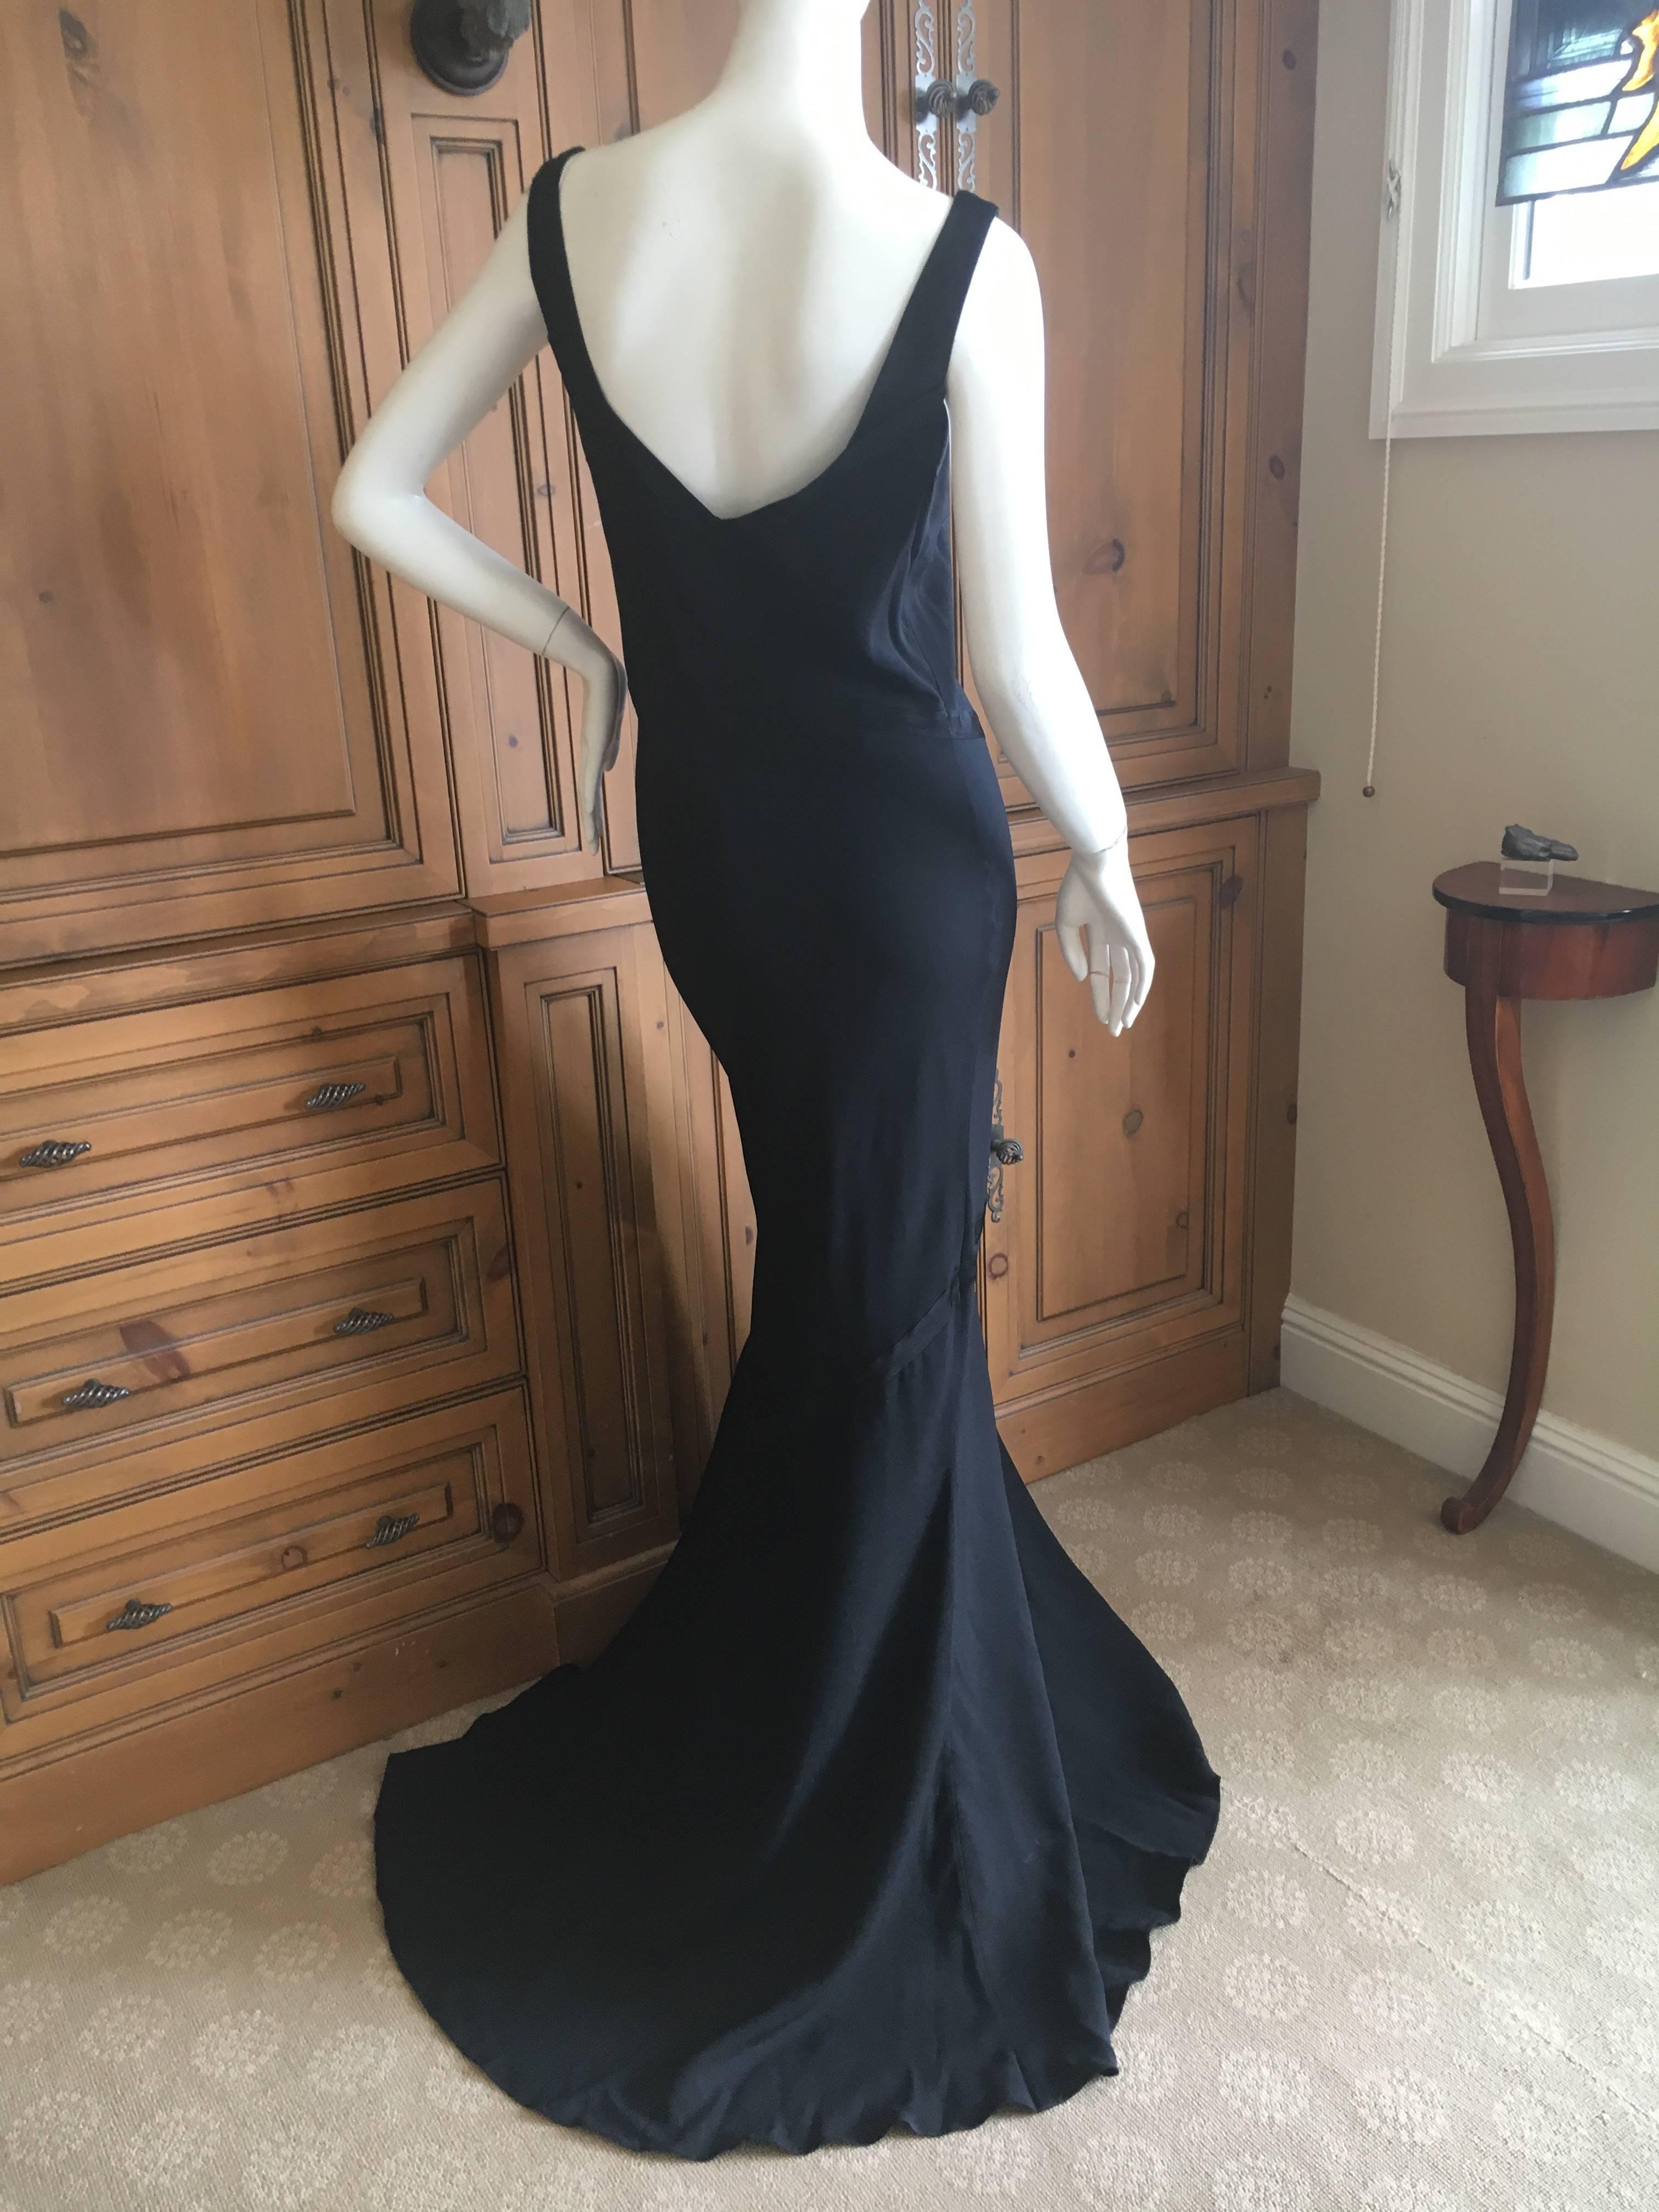 John Galliano 2001 Black Bias Cut Evening Dress with Train New with Tags Size 46 For Sale 2